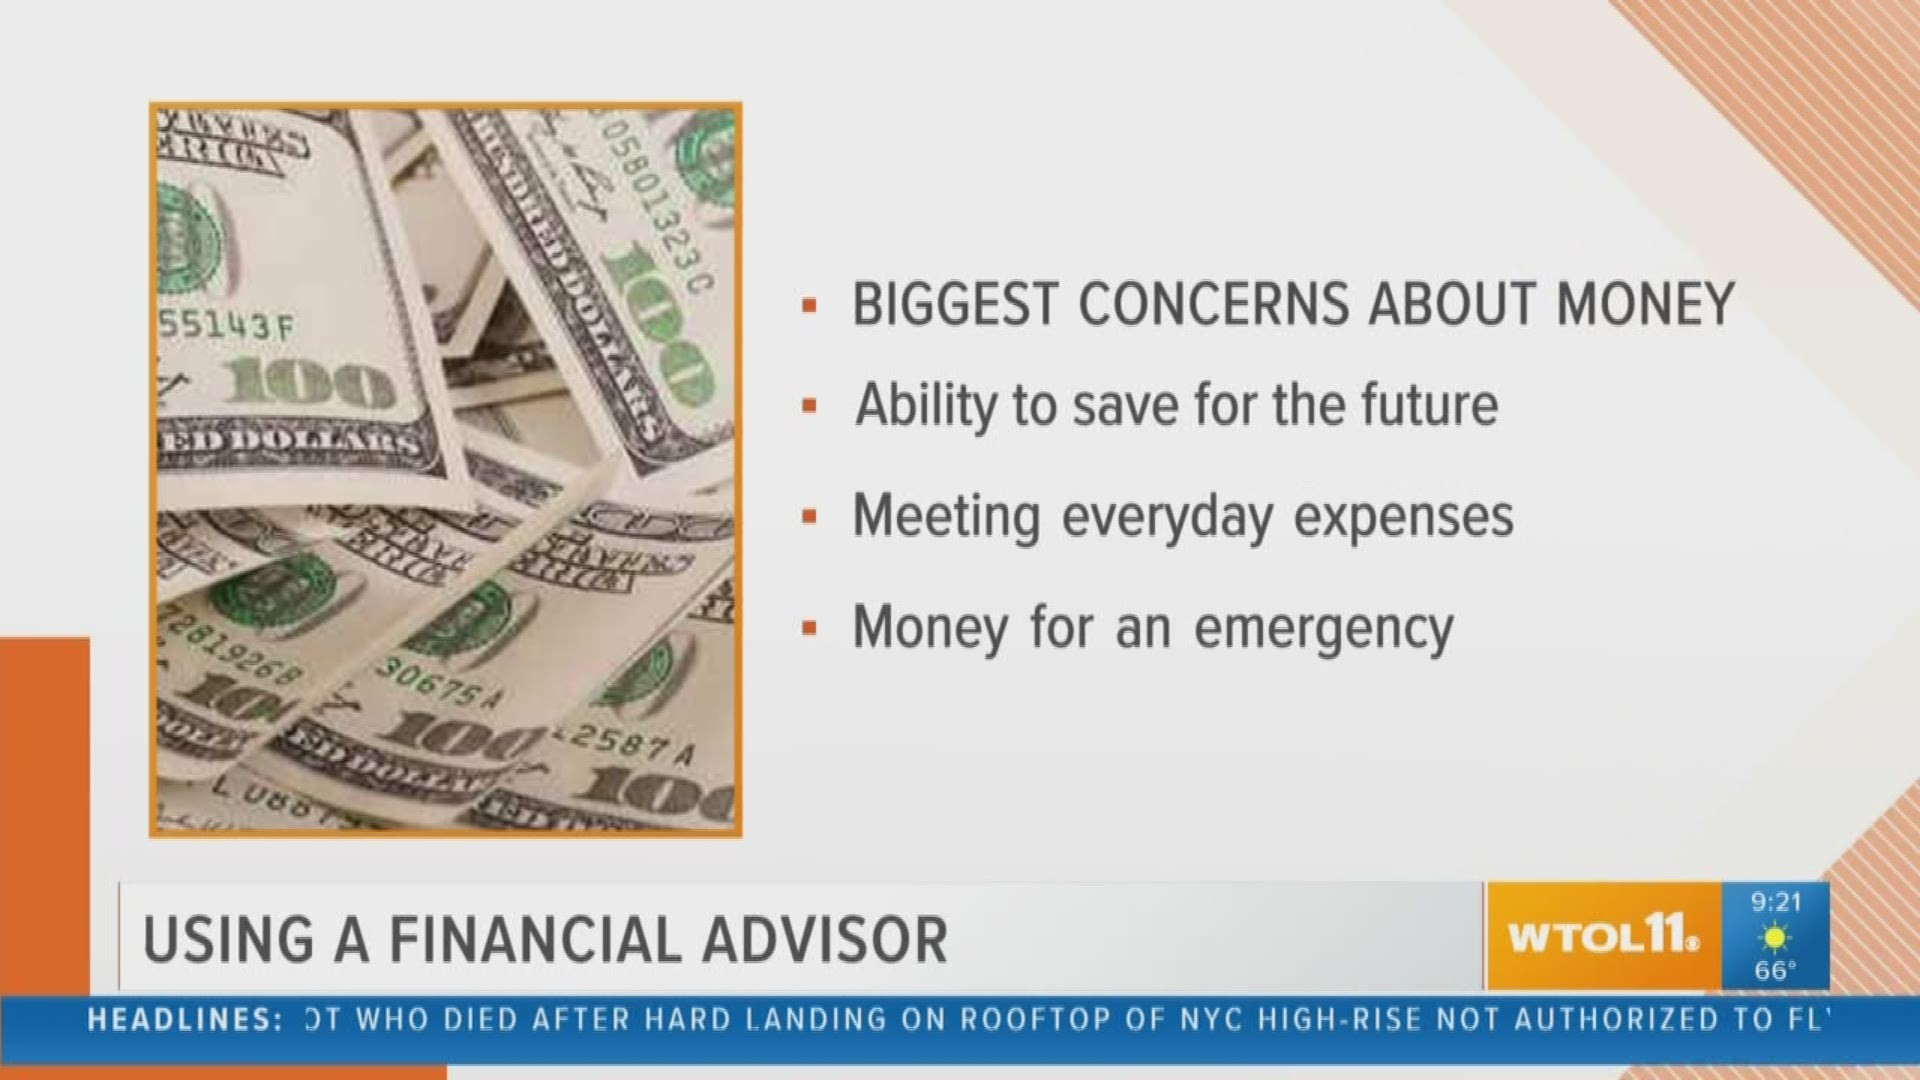 BJ Fischer from Thread Marketing talks about using a financial adviser and why it may or may not be for you.